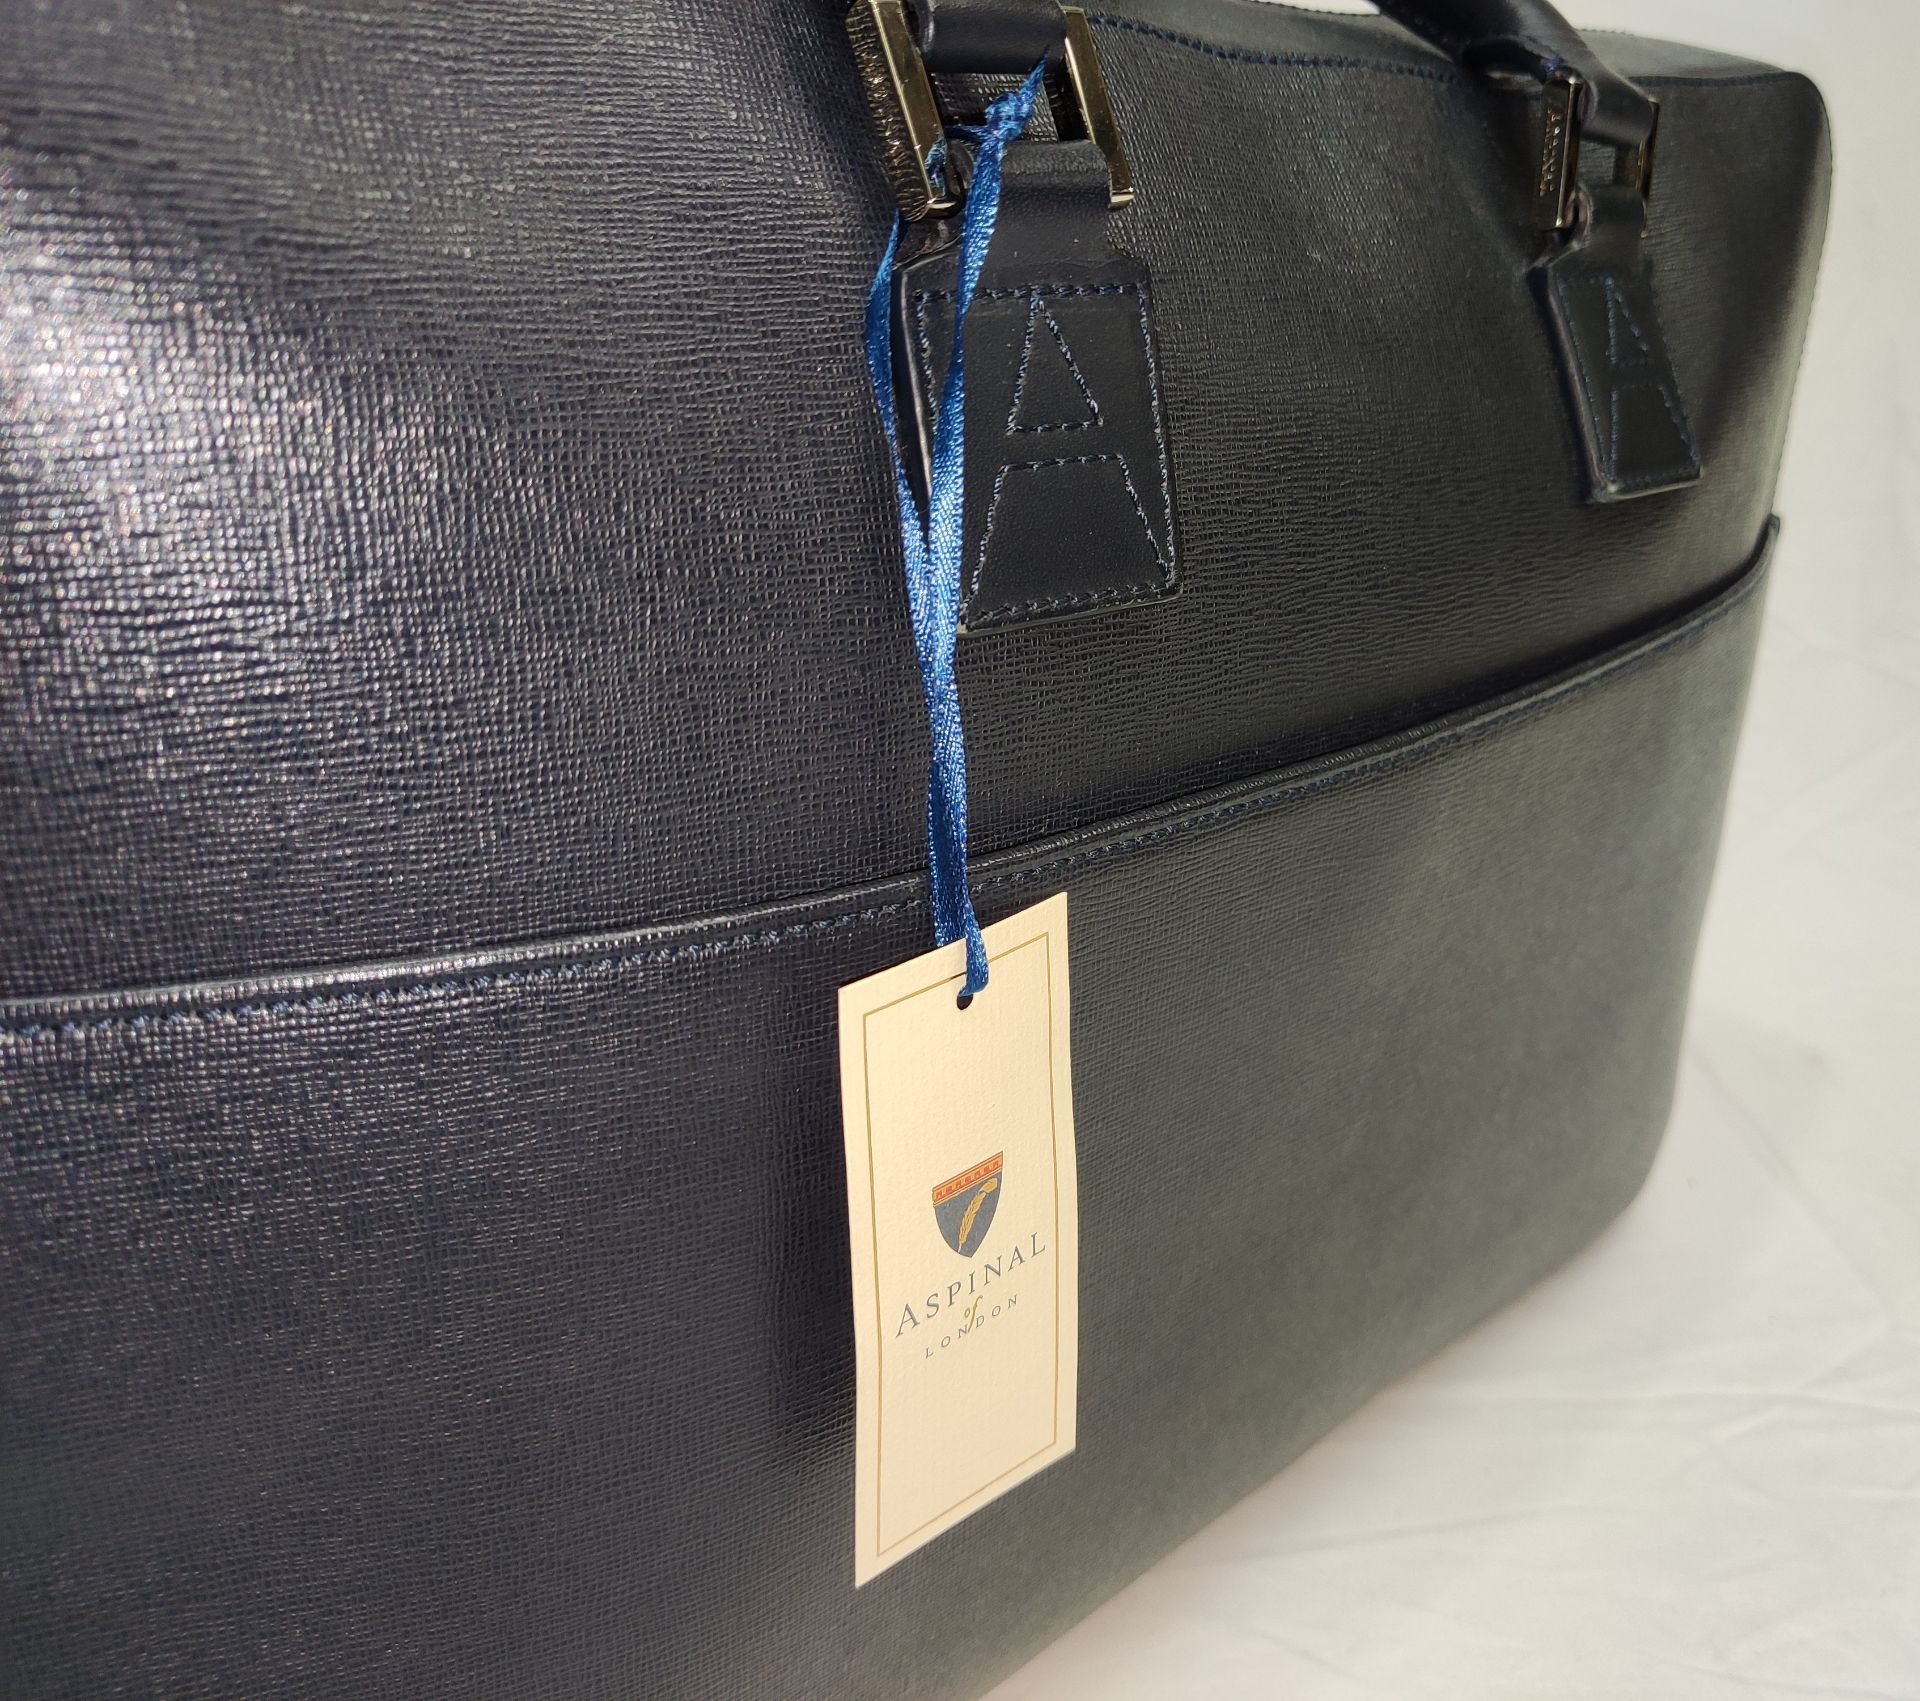 1 x ASPINAL OF LONDON Mount Street Small Laptop Bag In Black Saffiano - Original RRP £650 - Ref: - Image 8 of 21